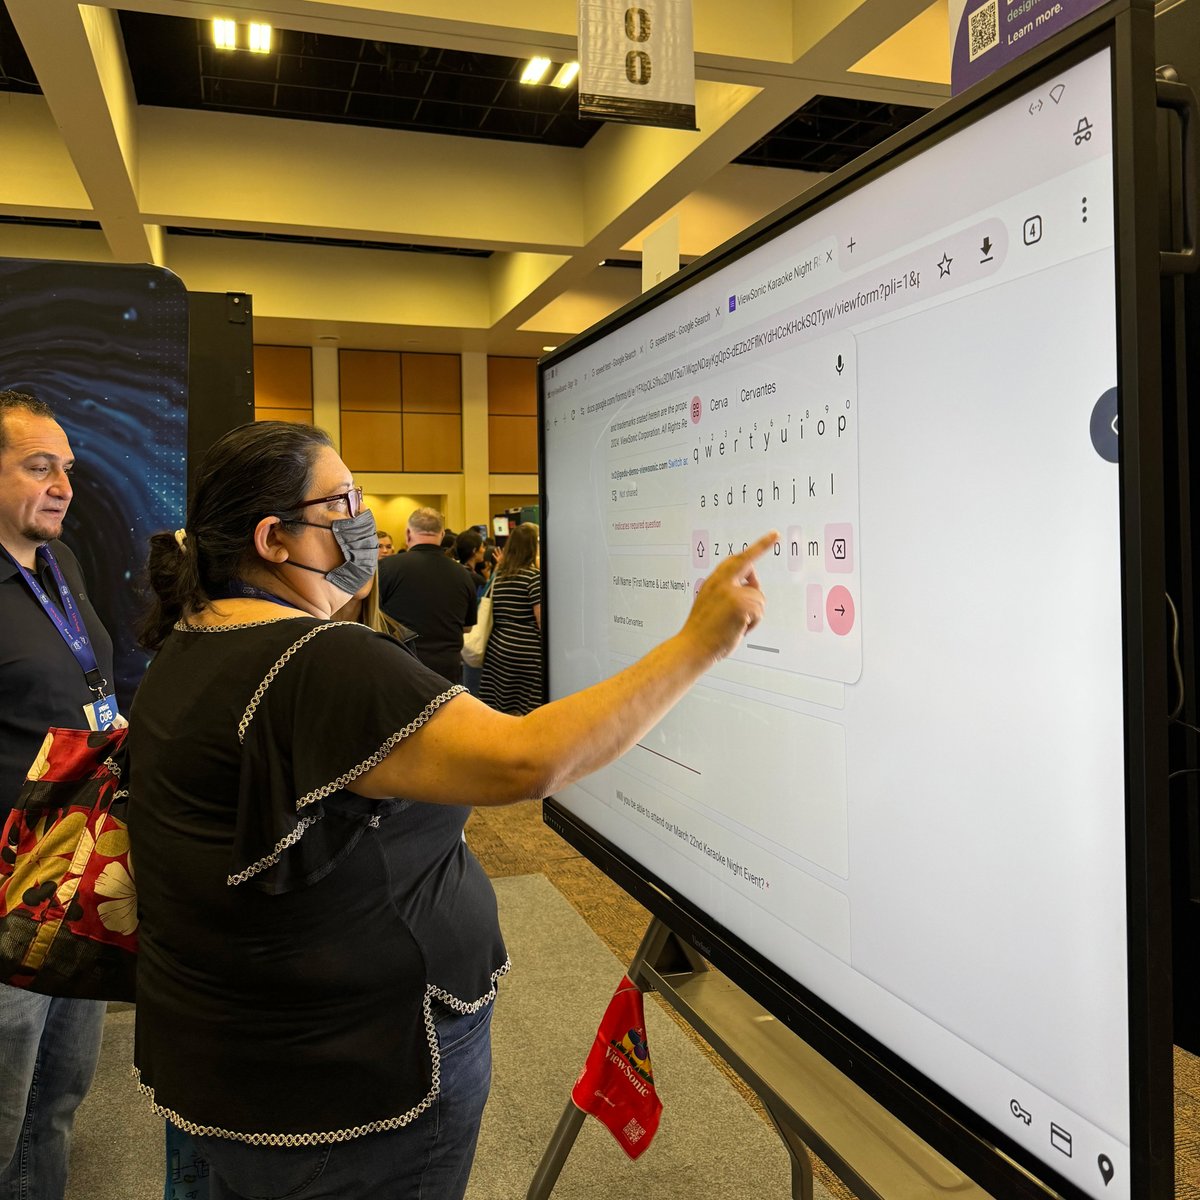 Introducing our newest innovation: the IFPG1! 🚀 Designed to transform classrooms, these interactive displays offer educators a flexible and sustainable solution to enhance student engagement and learning outcomes. #CUEmmunity #SpringCUE

Learn more: vsfinch.es/3xehuBW